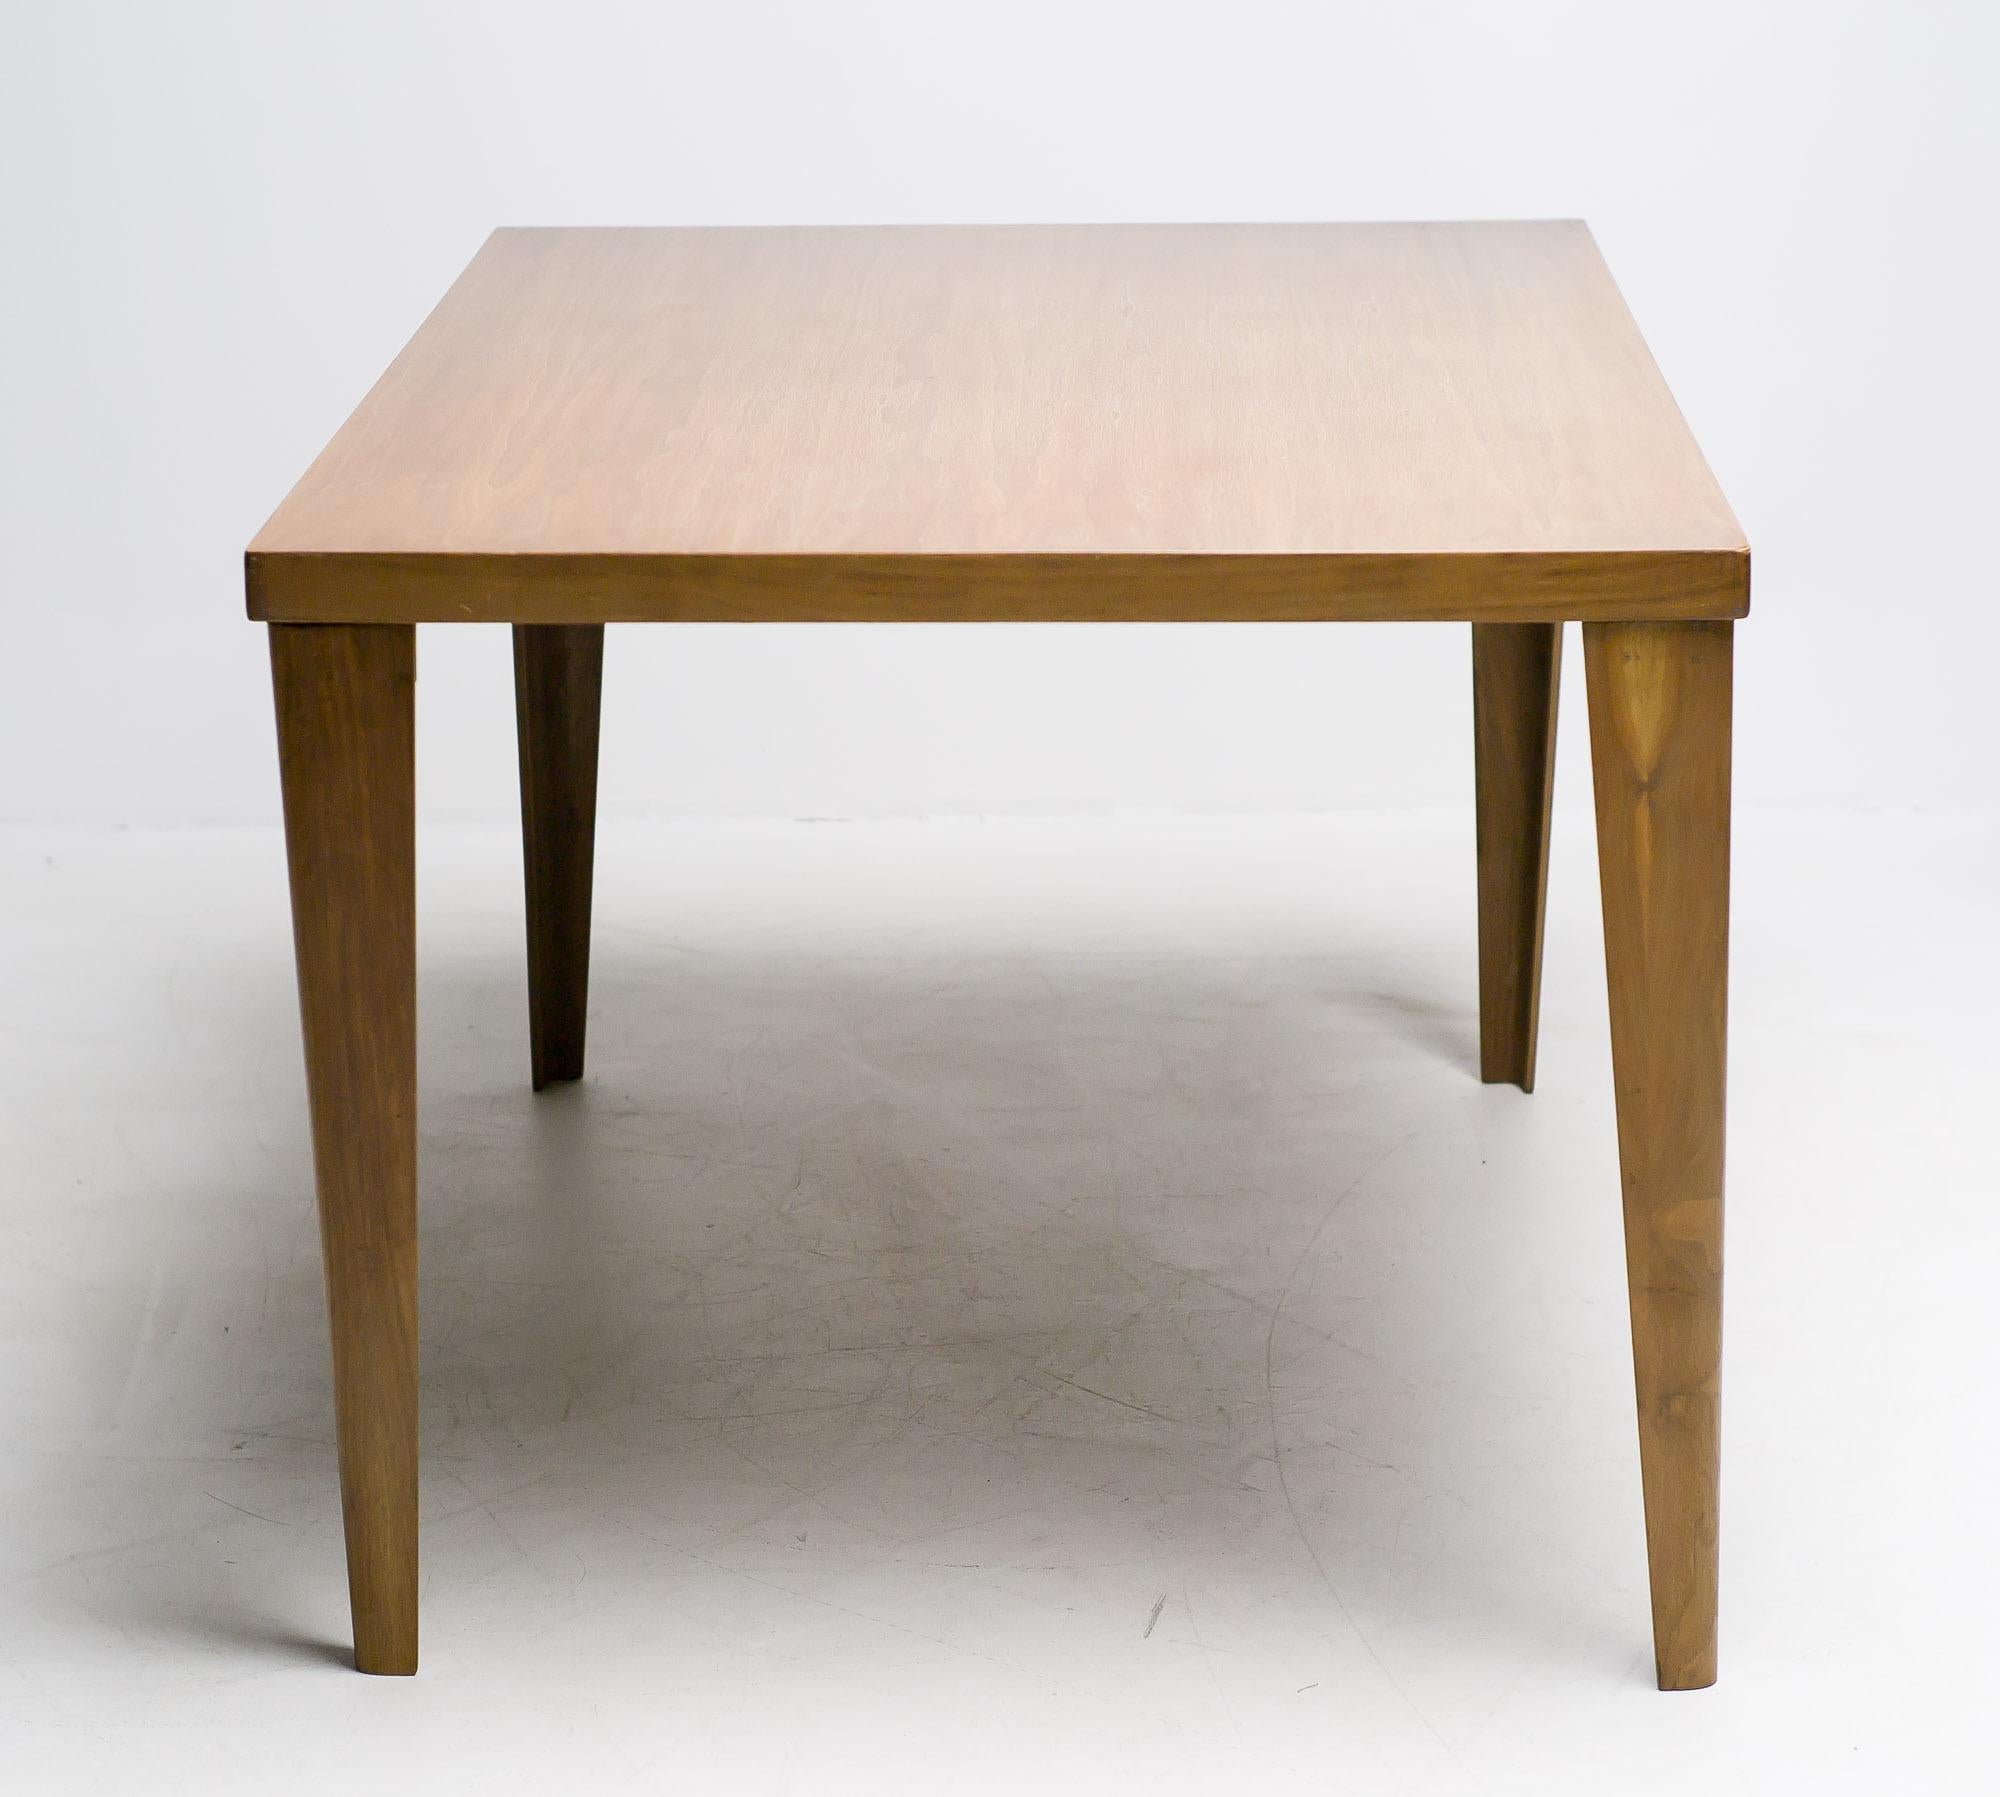 Mid-20th Century DTW-1 Table in Walnut by Charles Eames for Herman Miller